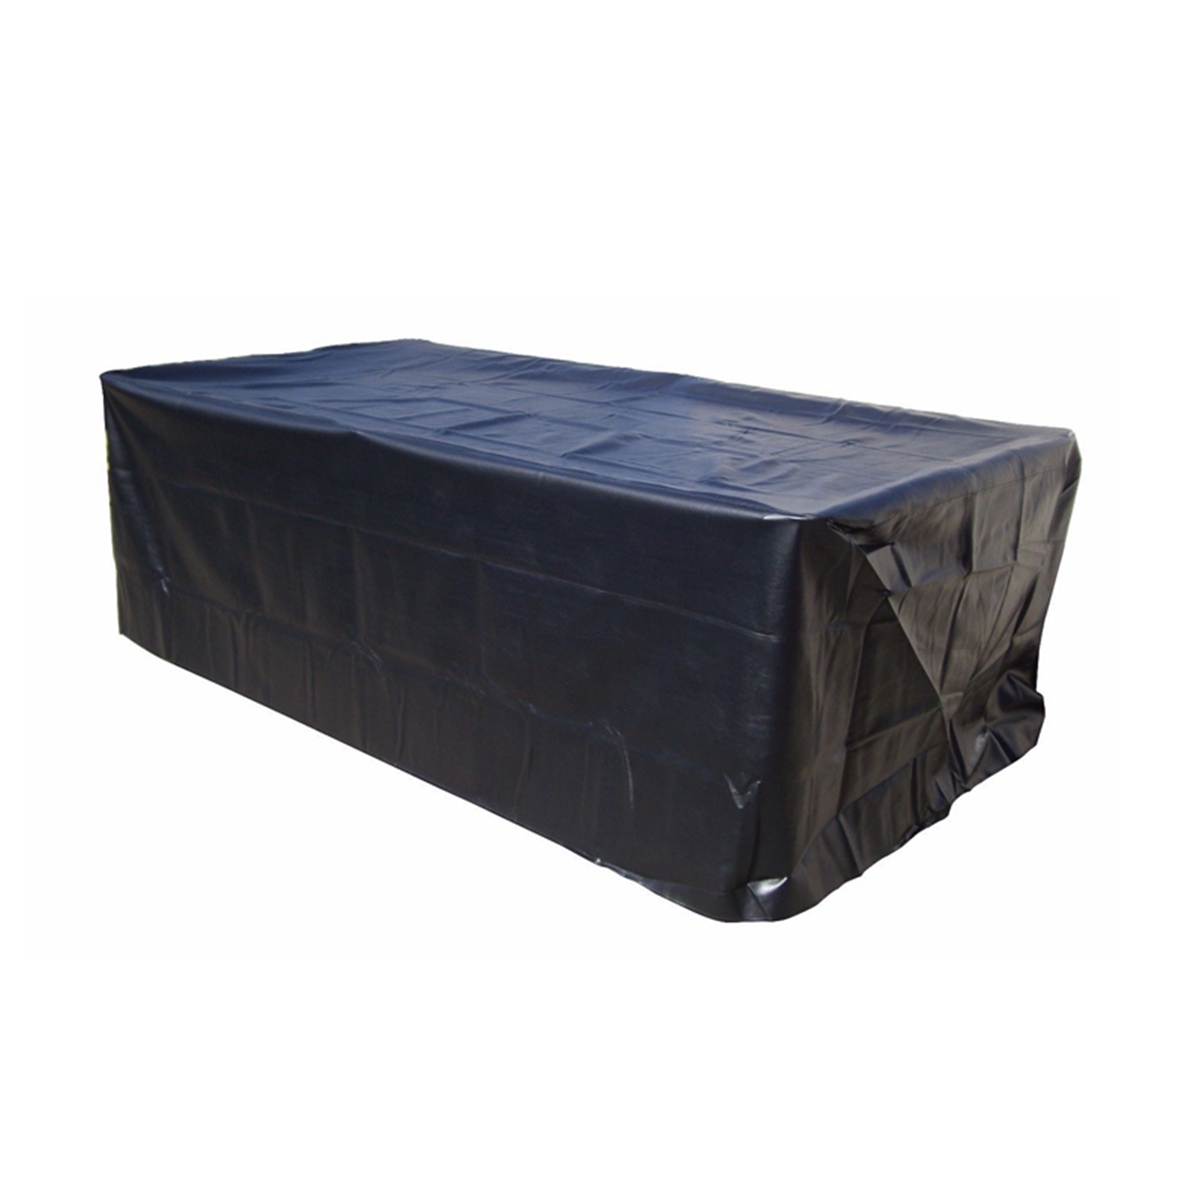 Multi-Size-Snooker-Billiard-Table-Cover-Polyester-Waterproof-Fabric-Outdoor-Pool-1440471-1